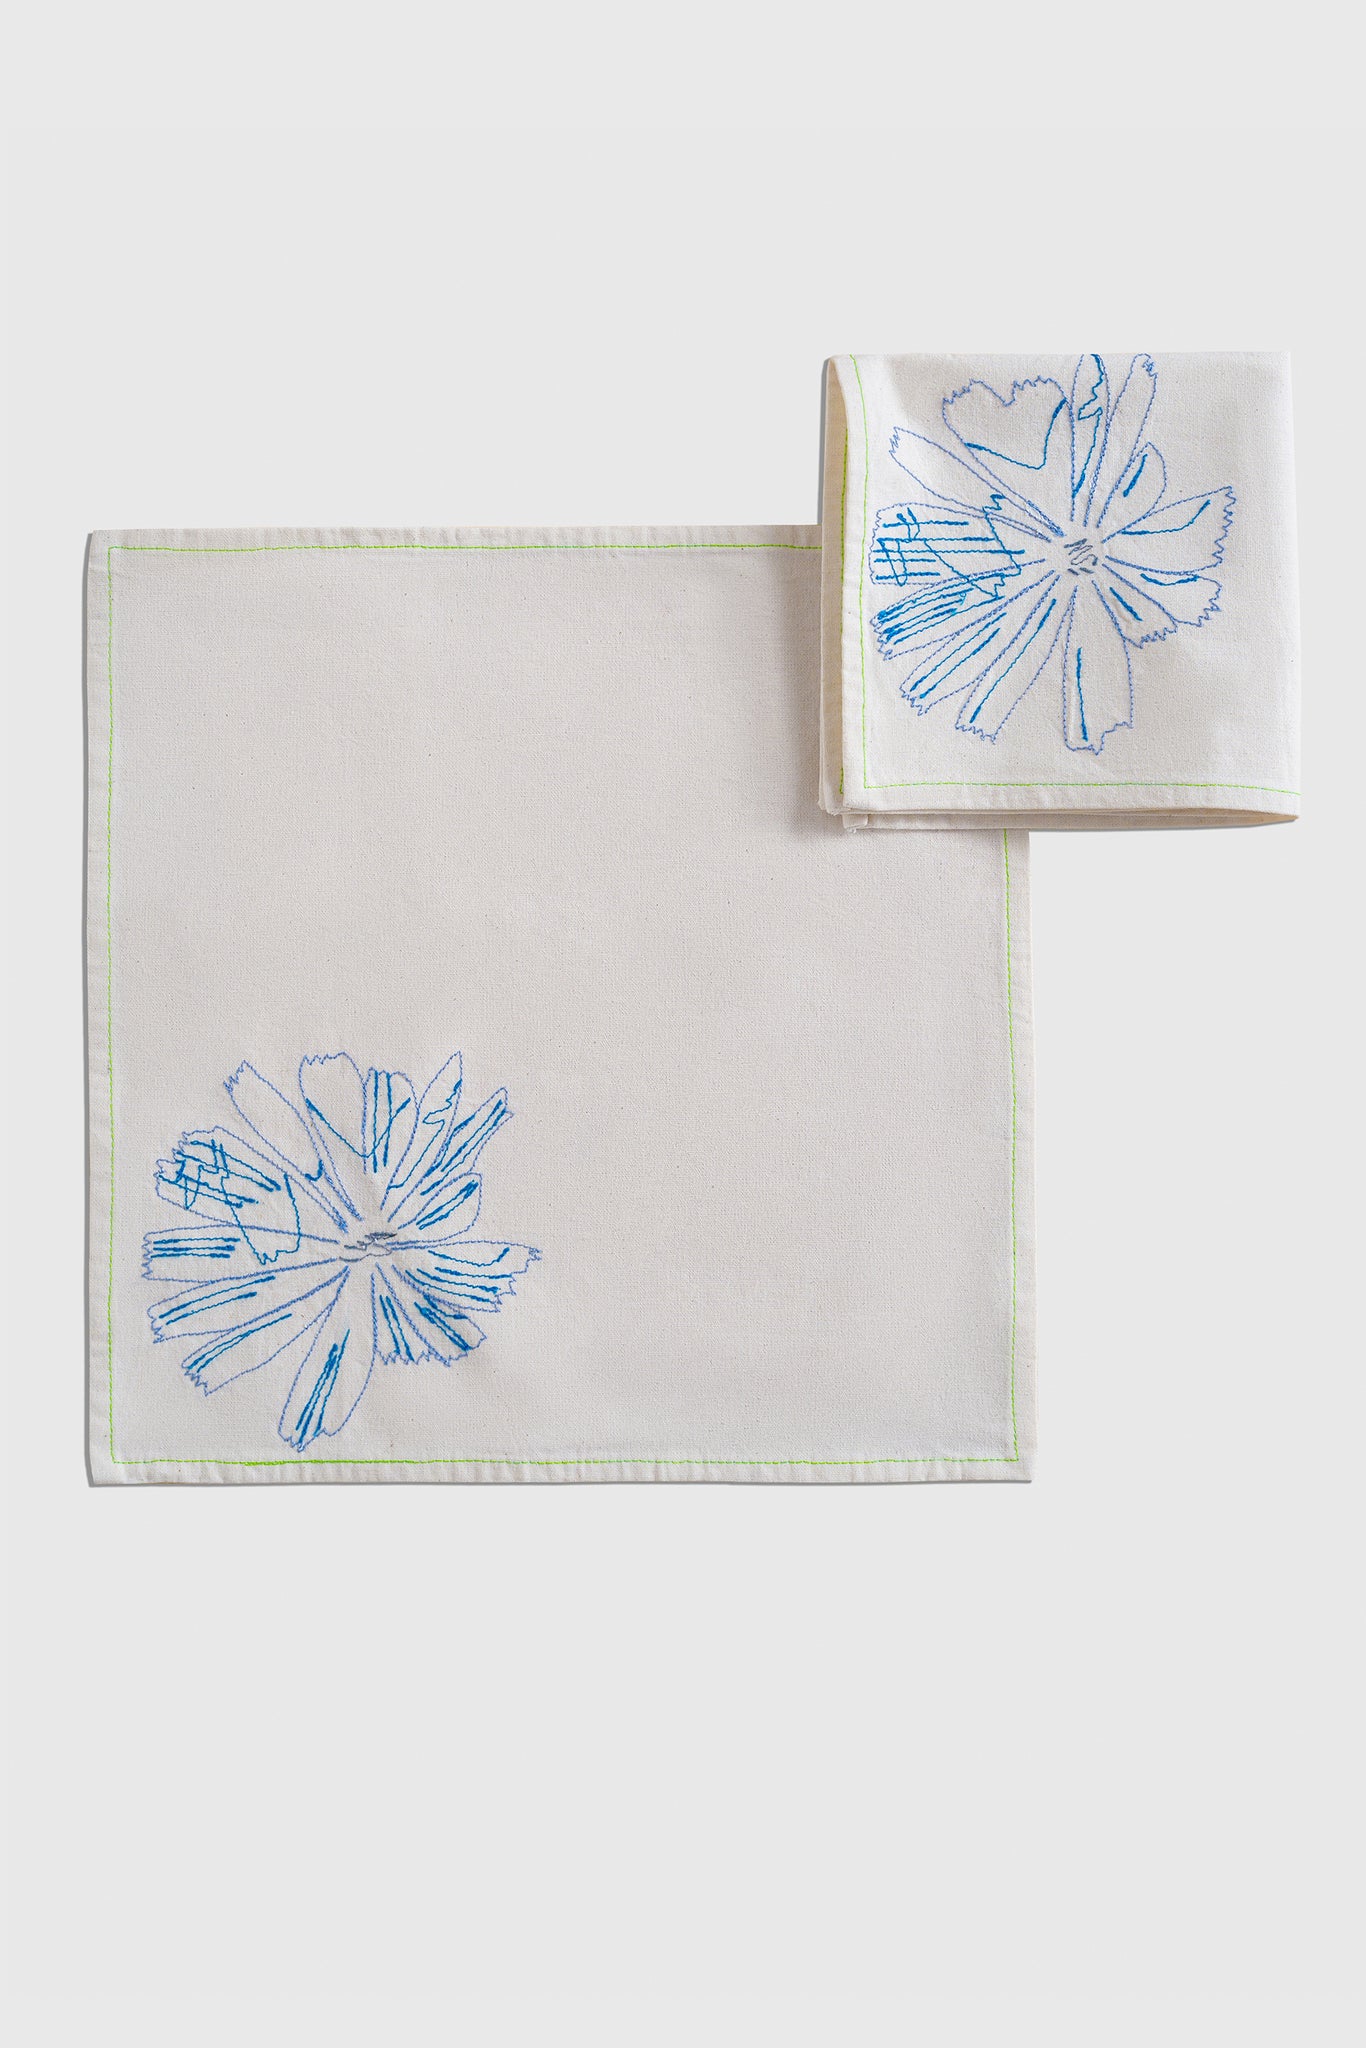 Ruxandra, square table napkin, linen napkin embroidered with chicory flower, blue color on natural color linen, cotton table, artisanal creation, square shape, for reunion tables, artistic families